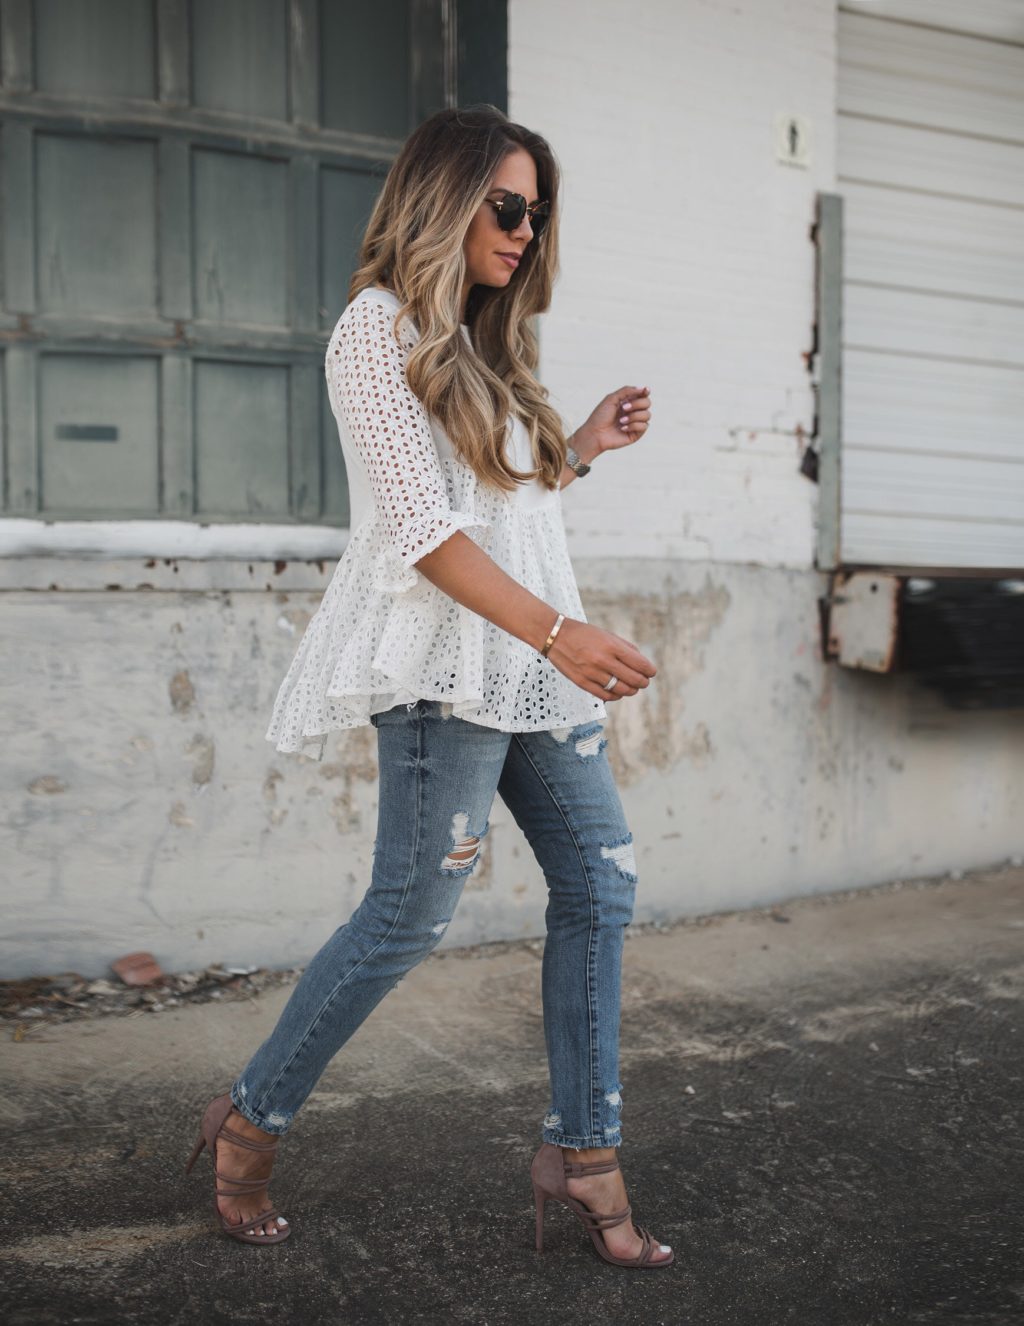 What to pair with an eyelet blouse